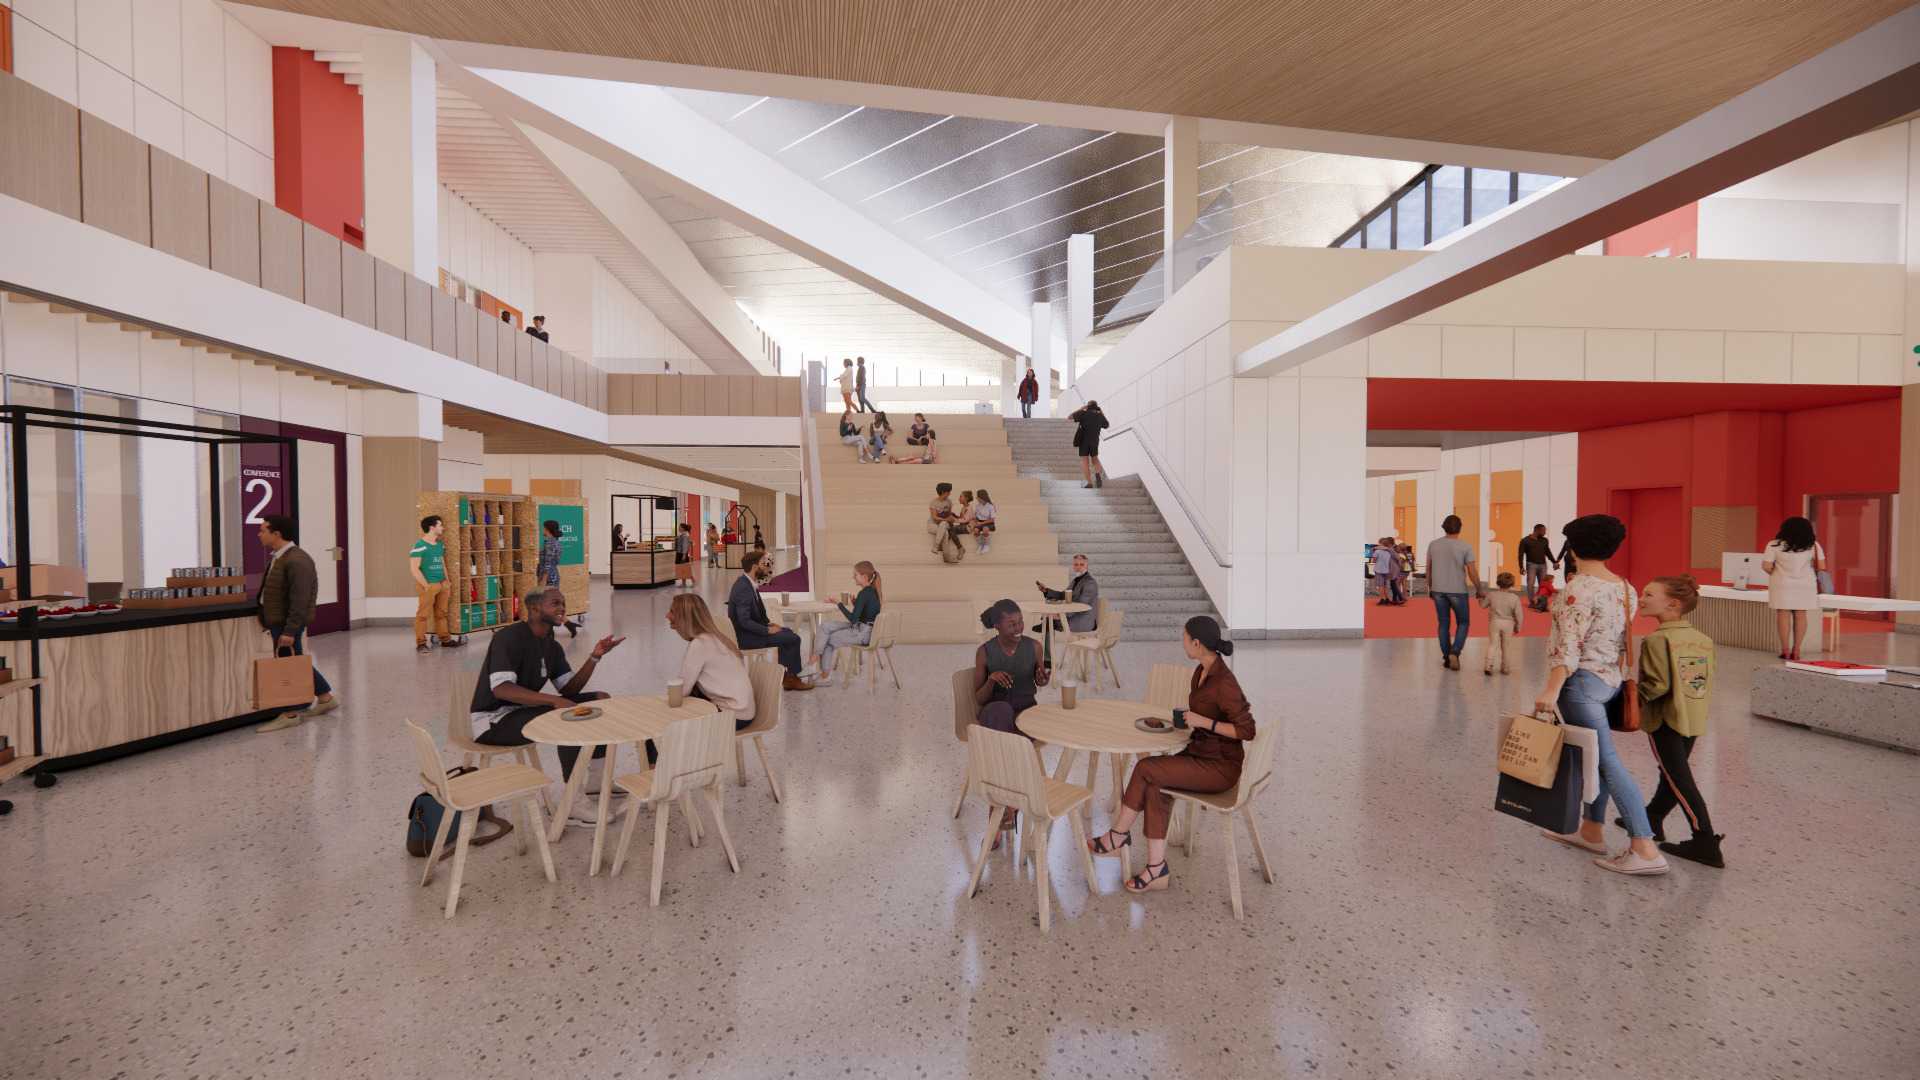 Building atrium with people walking and people sitting at café tables.